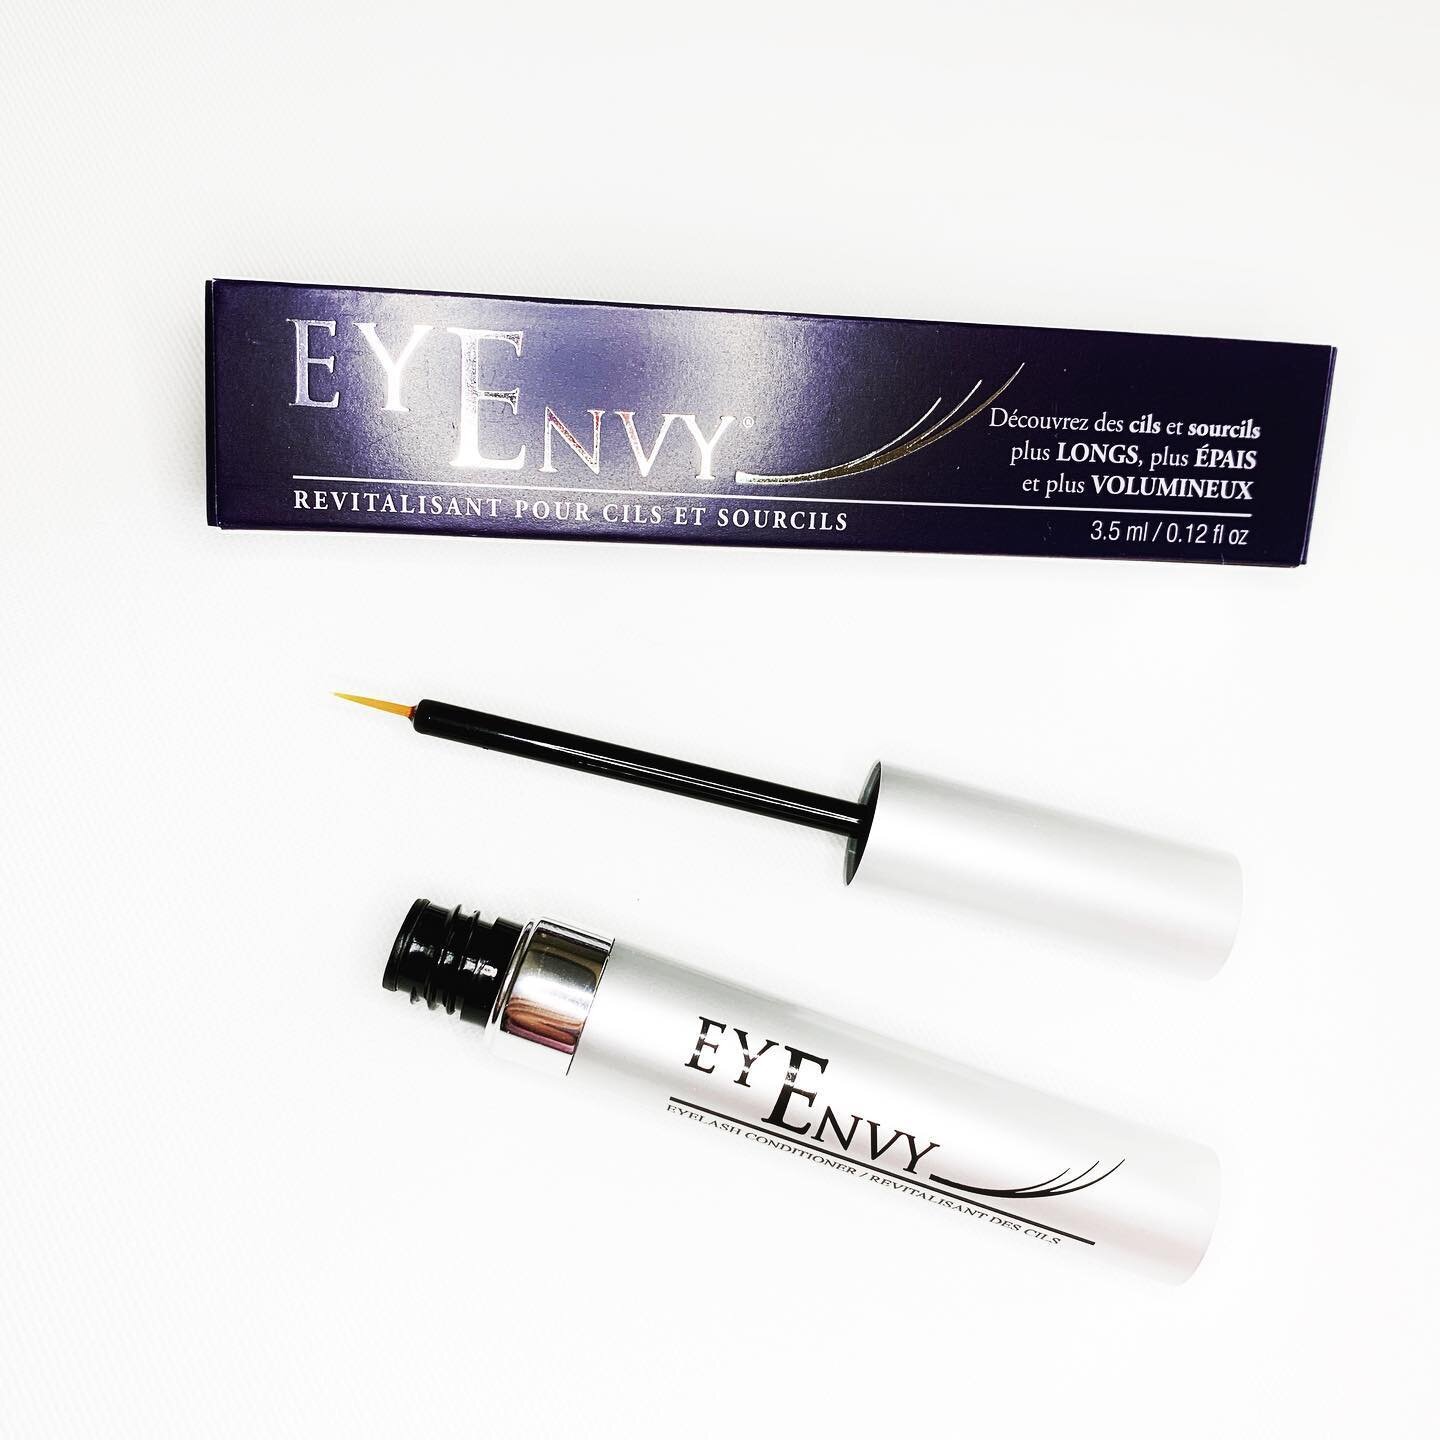 🌱Canada&rsquo;s top growth serum! EyEnvy is a breakthrough formula that improves the length, volume and thickness of your eyelashes and eyebrows.

Perfect for🙌
- Those that have sparse eyebrows
- Those who are pre or post menoposal
- Those who are 